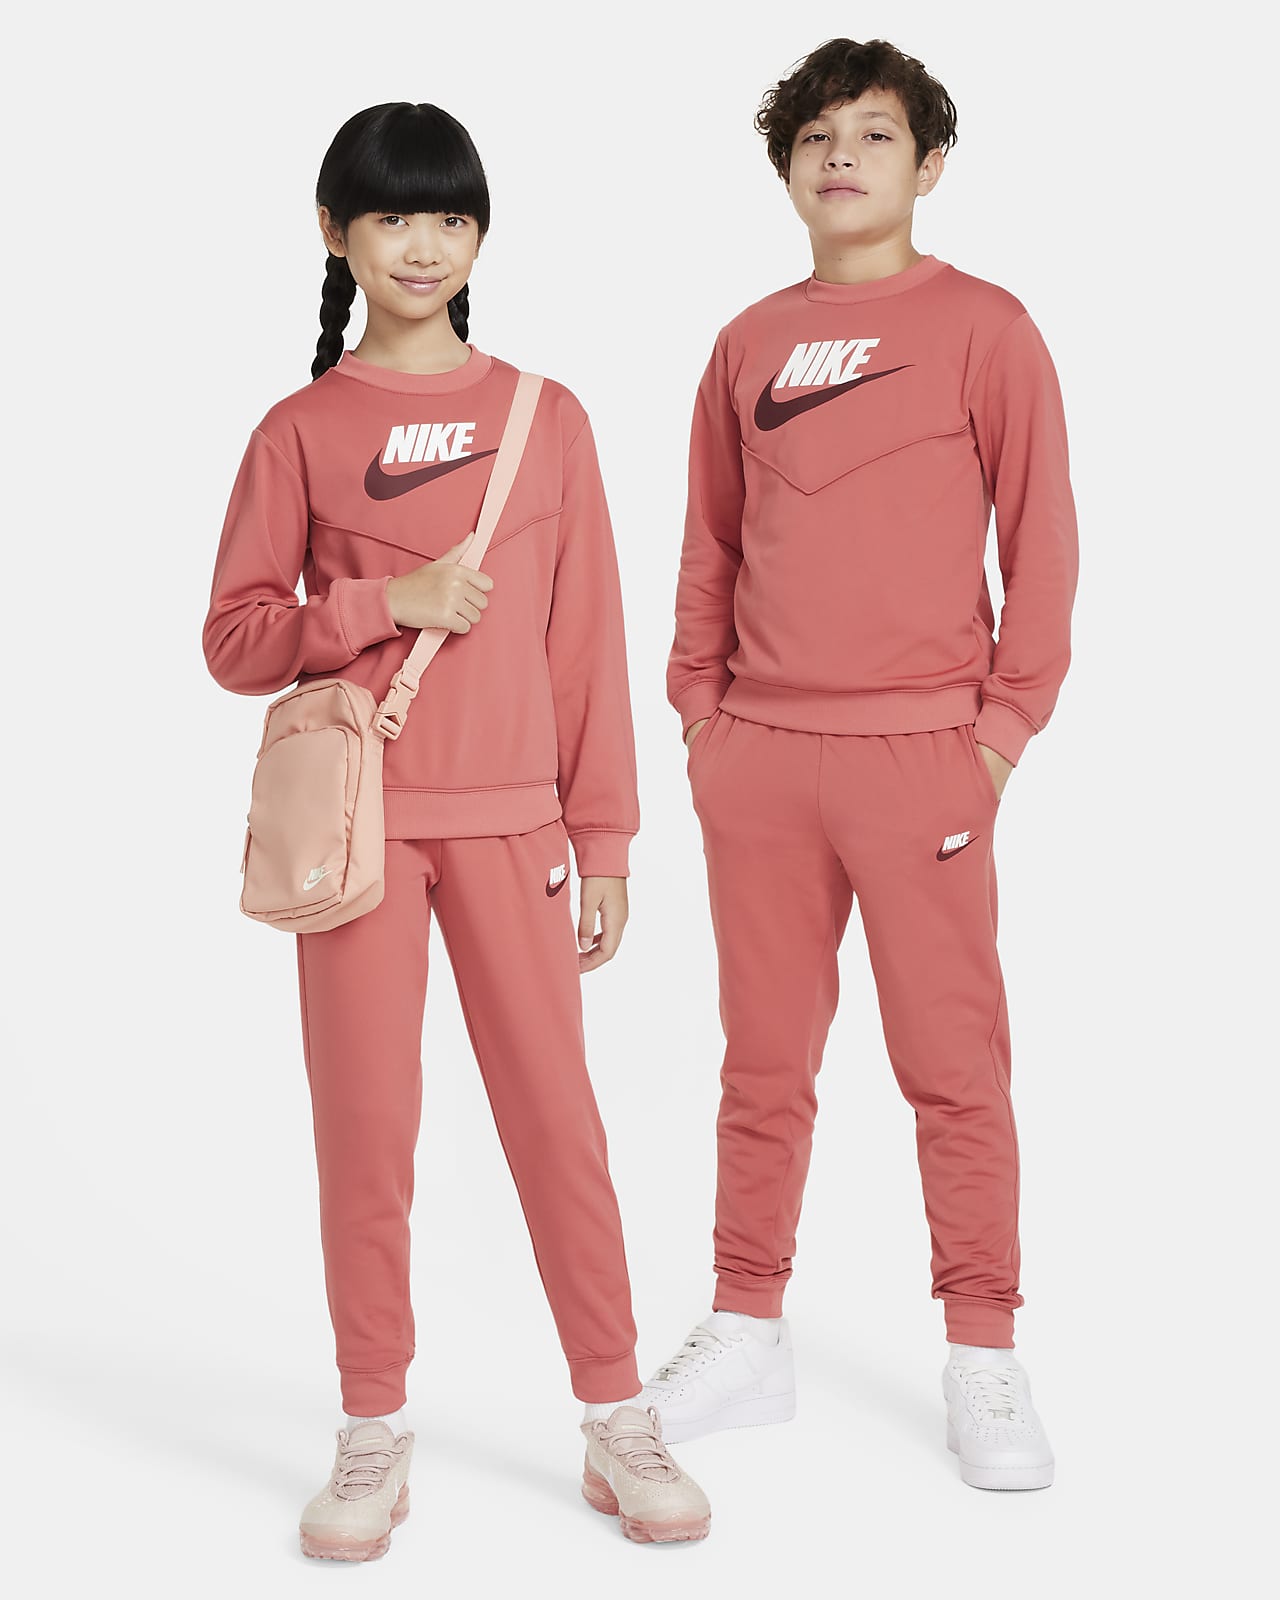 Low Price ₹ 2 501.00 - ₹ 7 500.00 Nike Tracksuit Tops. Nike IN